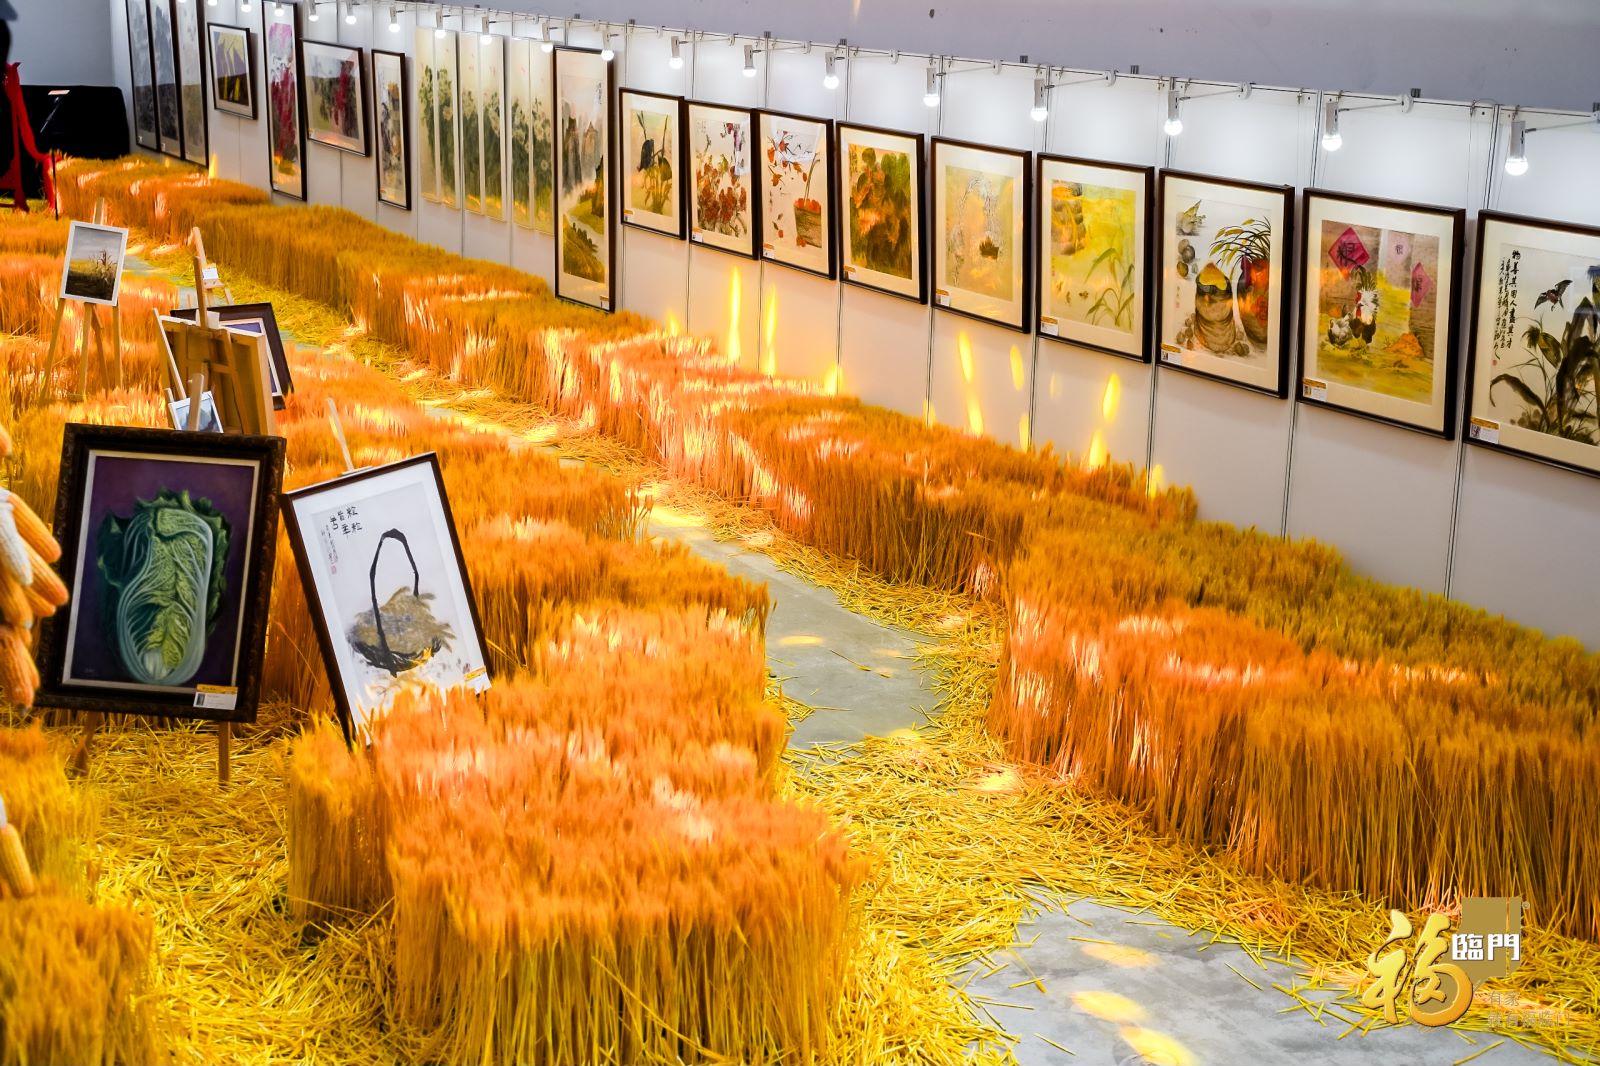 MUSE Design Awards Winner - Art Installation for China's Farmers' Harvest Festival by Zhichao Wang